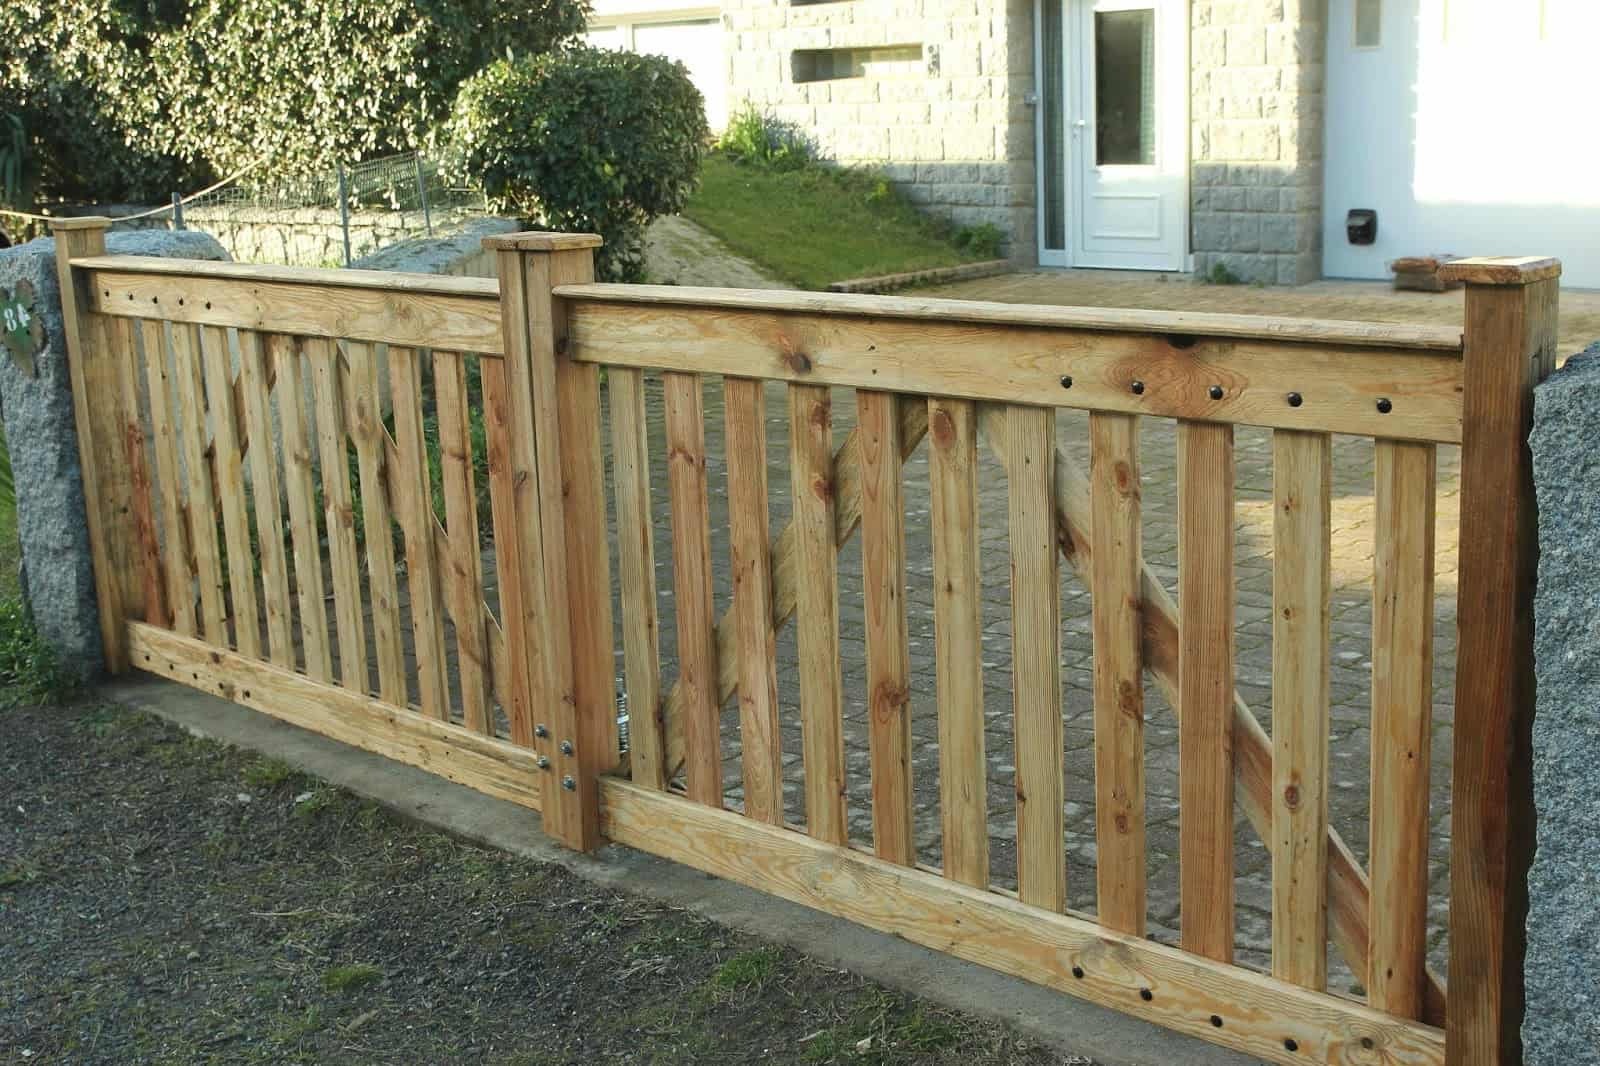 DIY Driveway Gate: Step-by-Step Guide To Building Your Own